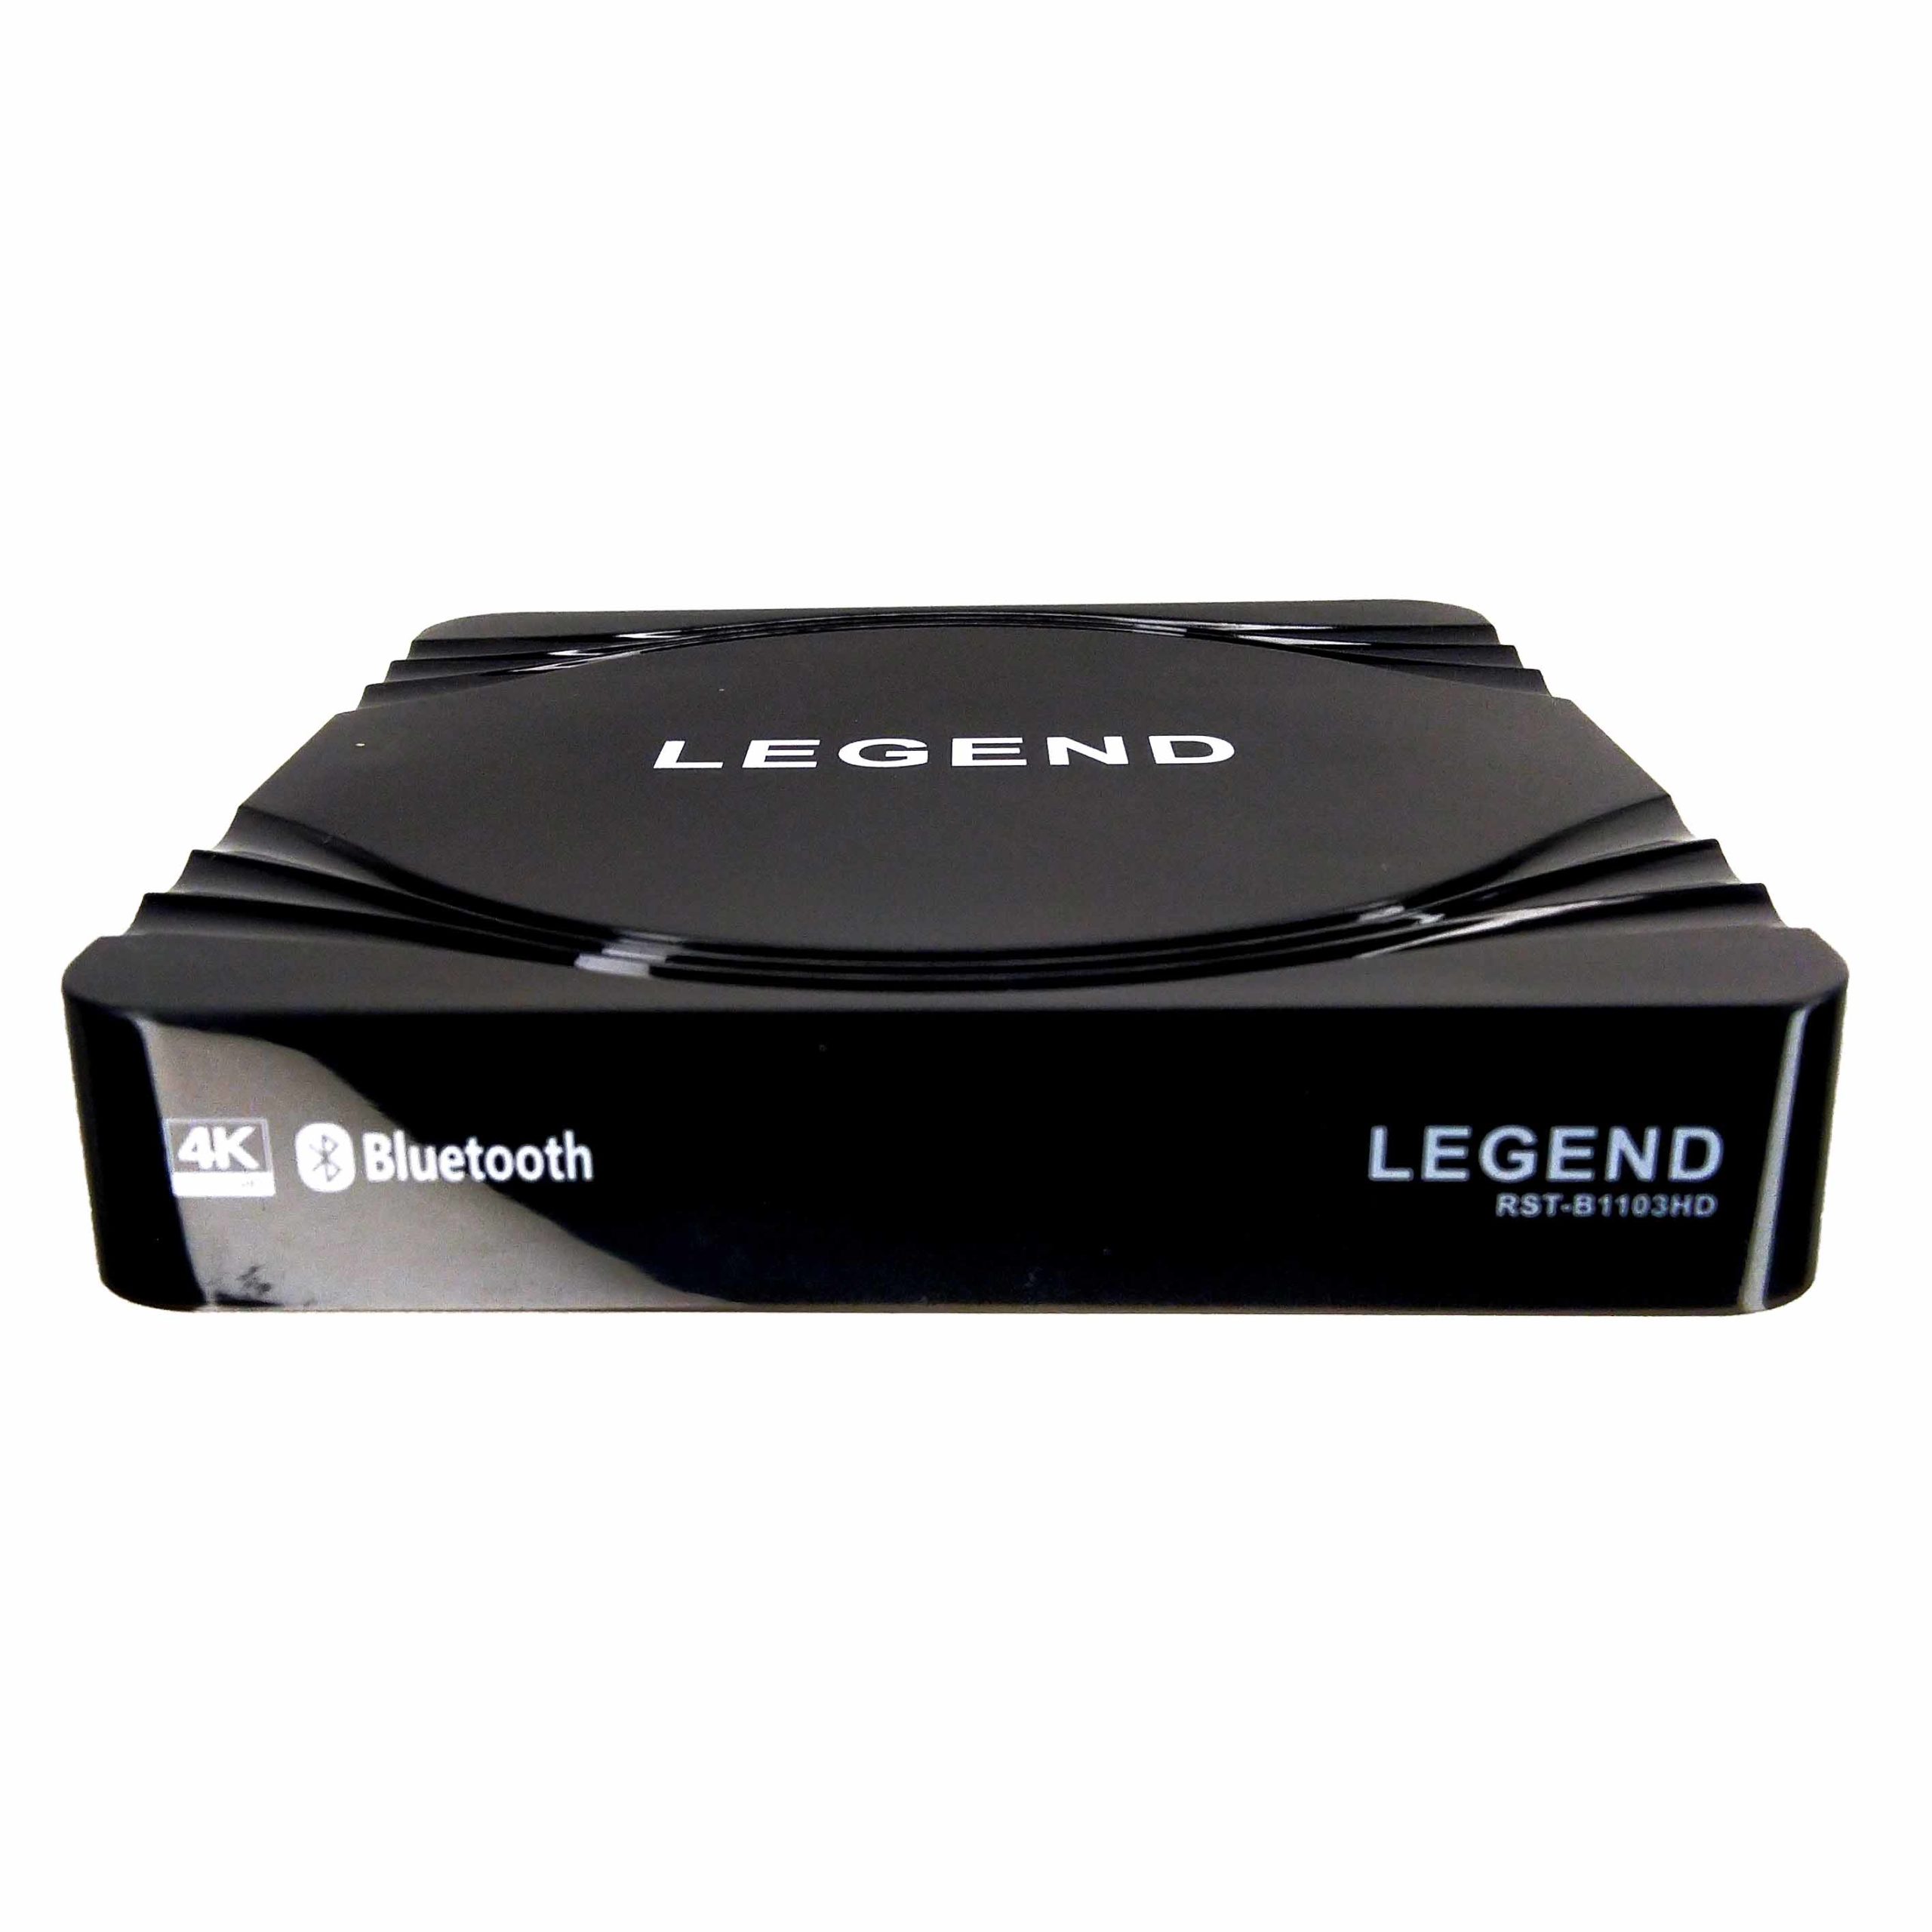 You are currently viewing Новинка!!! Приставка LEGEND Android RST-B 1103 HD smart TV